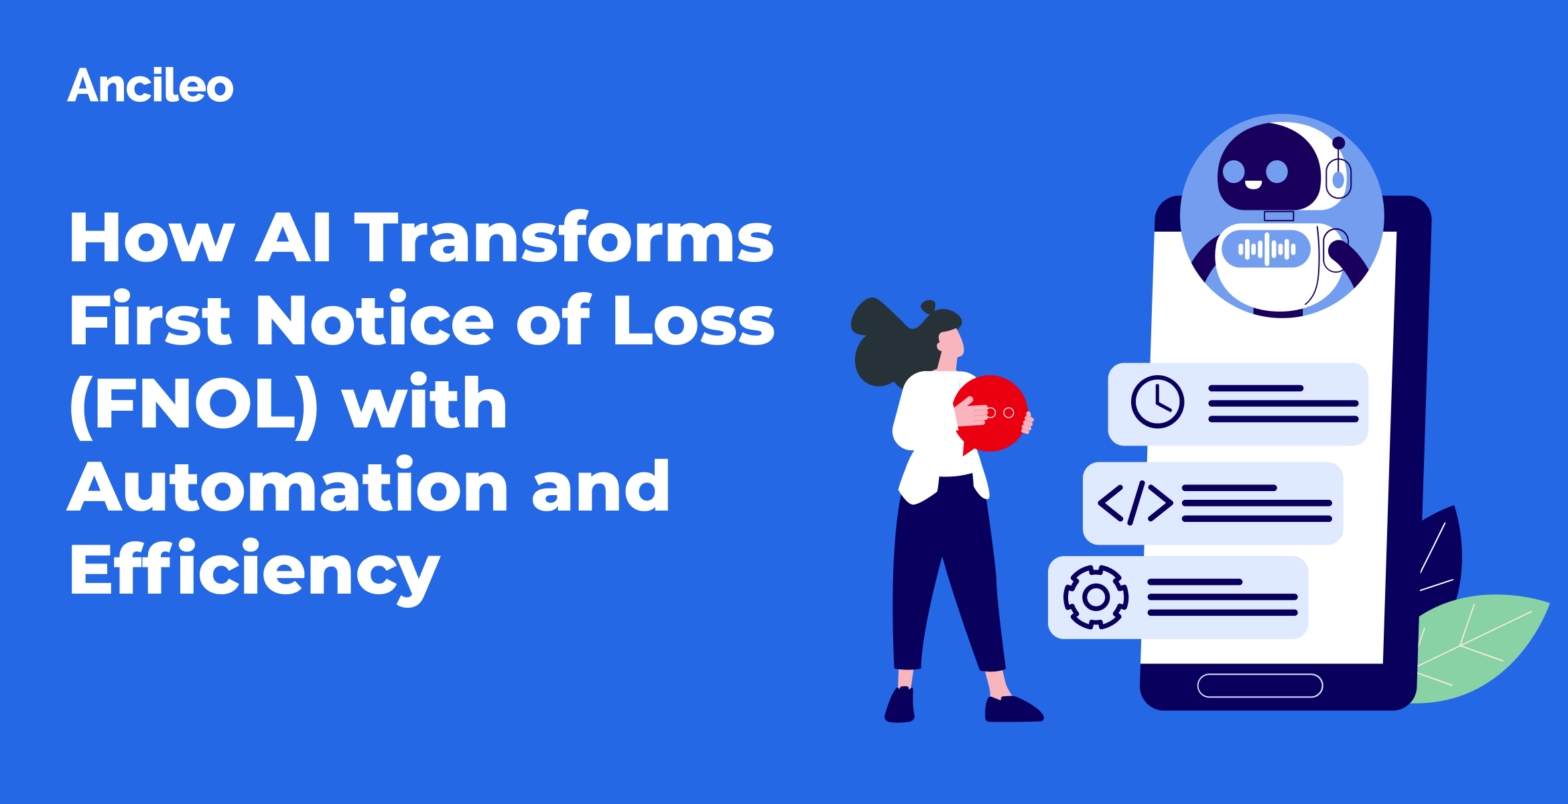 How AI Transforms First Notice of Loss (FNOL) with Automation